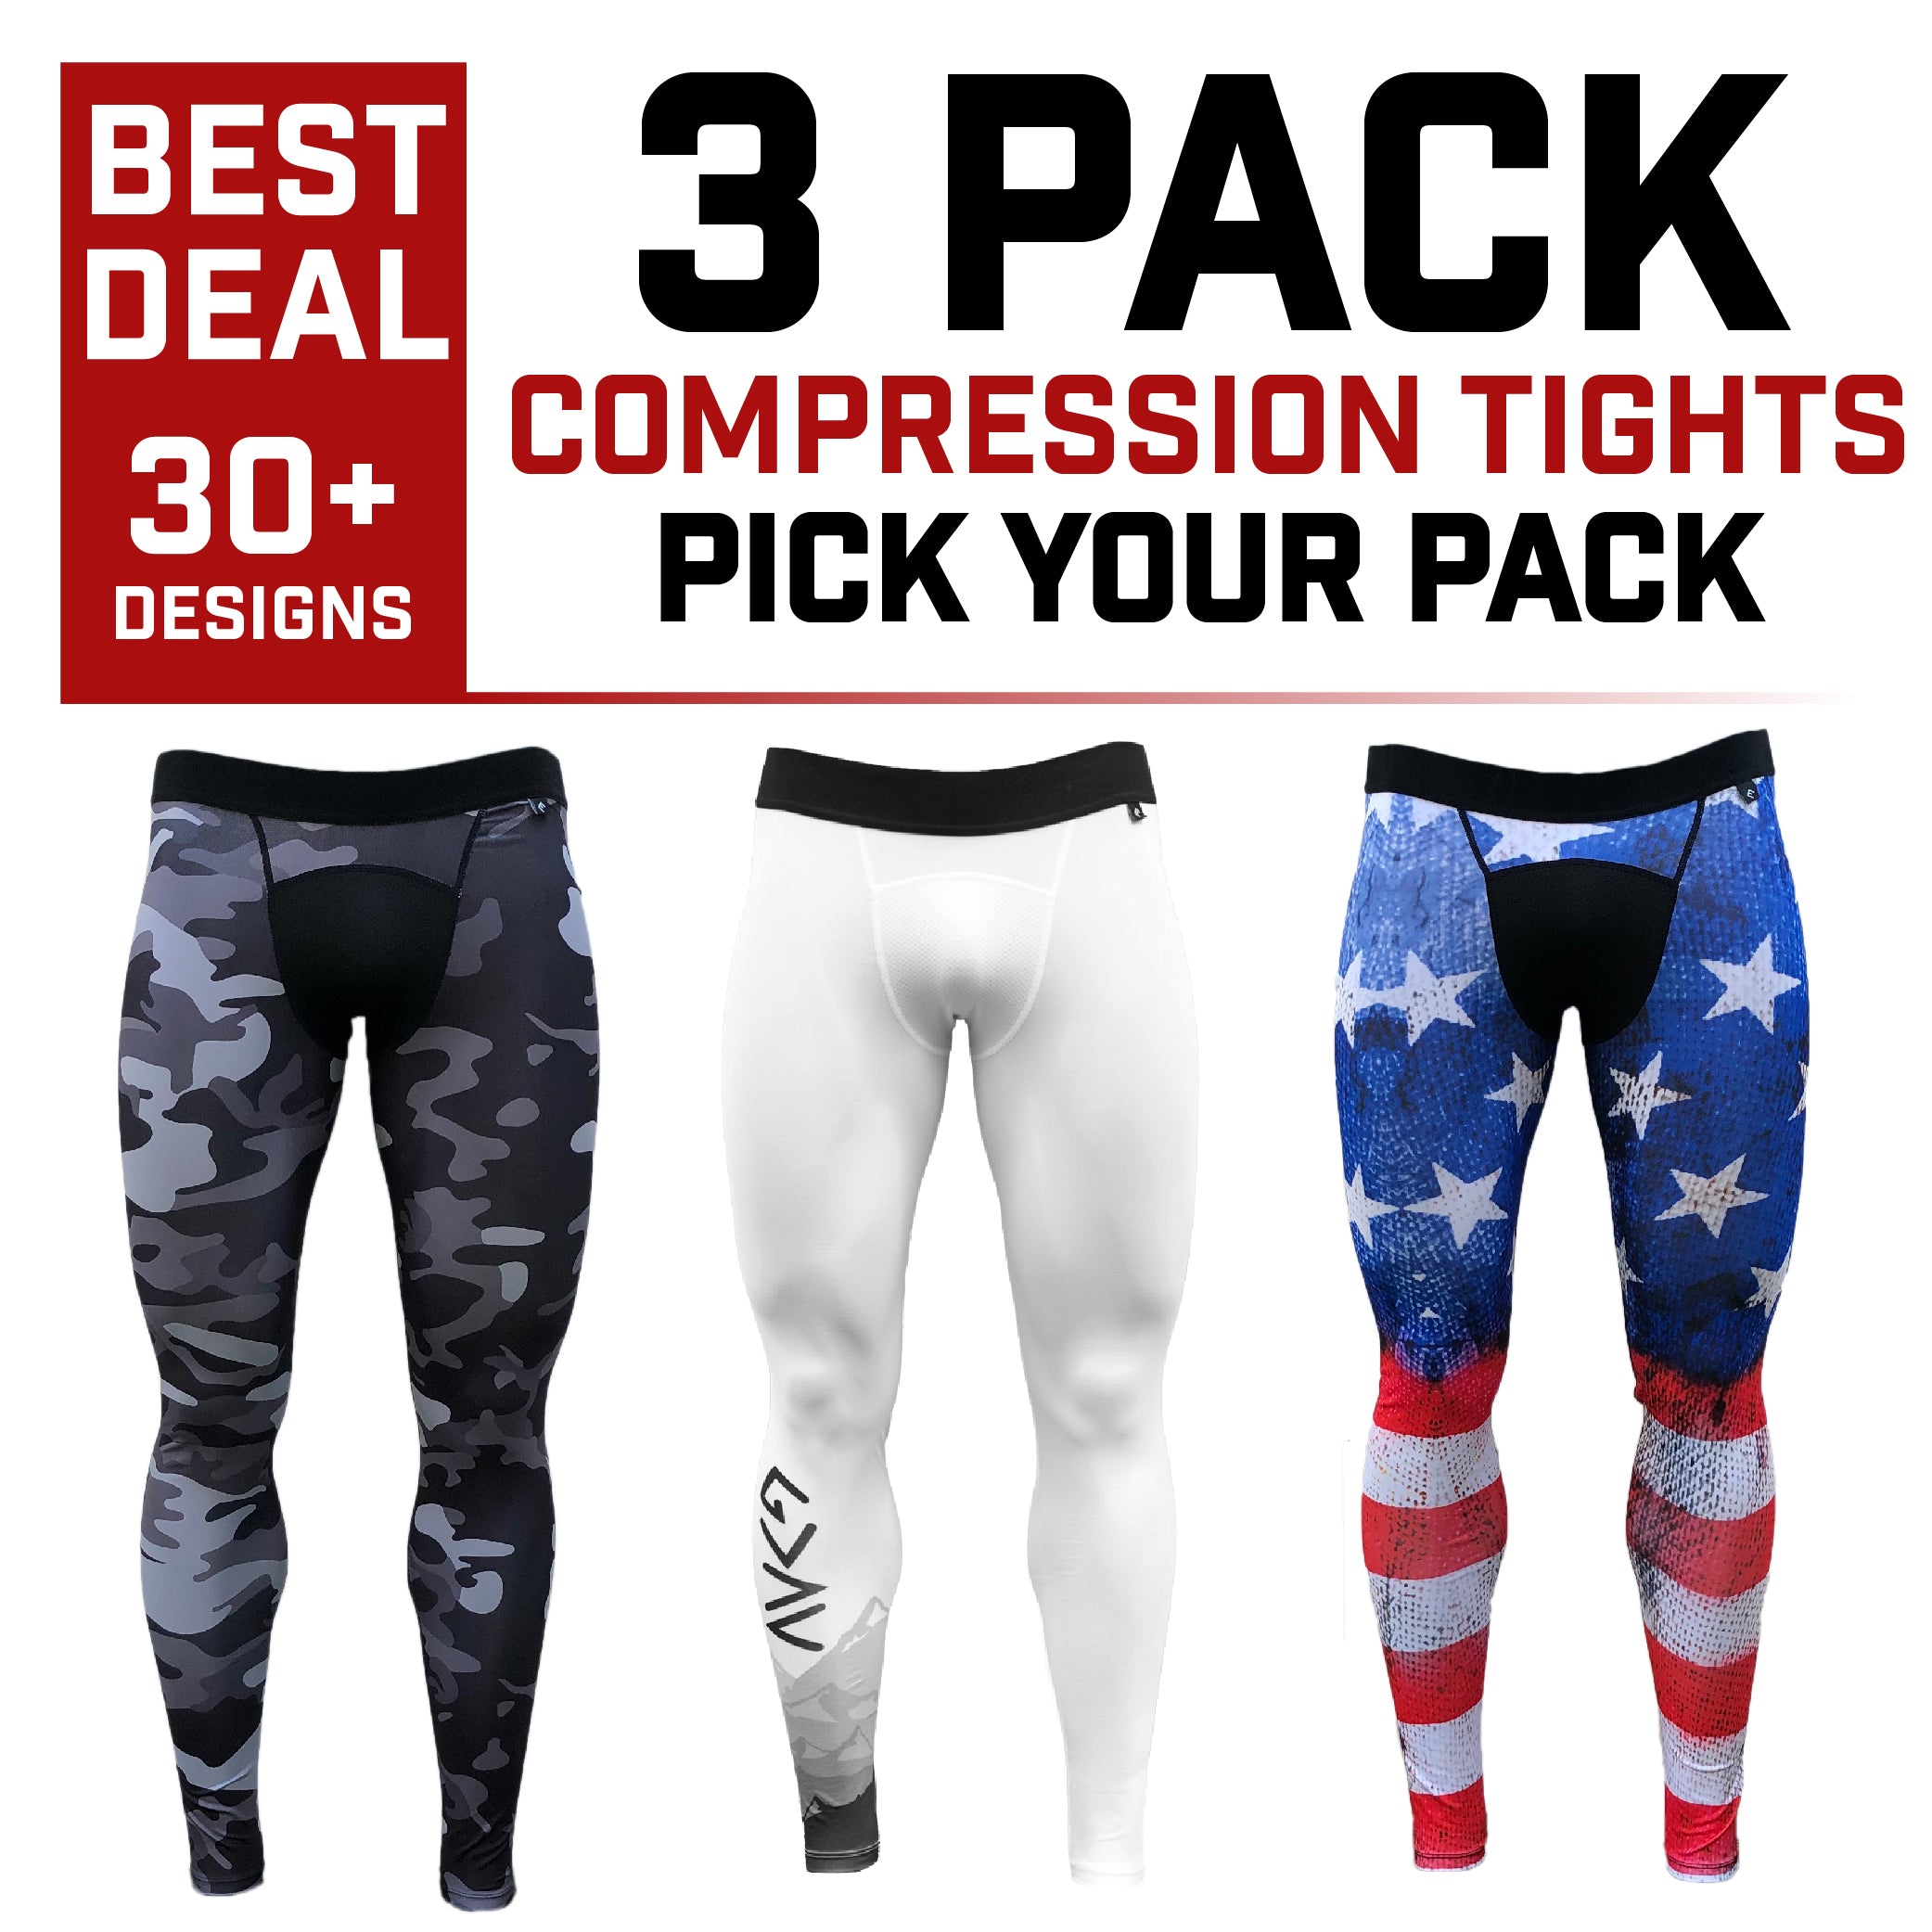 3 Pack Men s Compression Tights Pick Your Pack